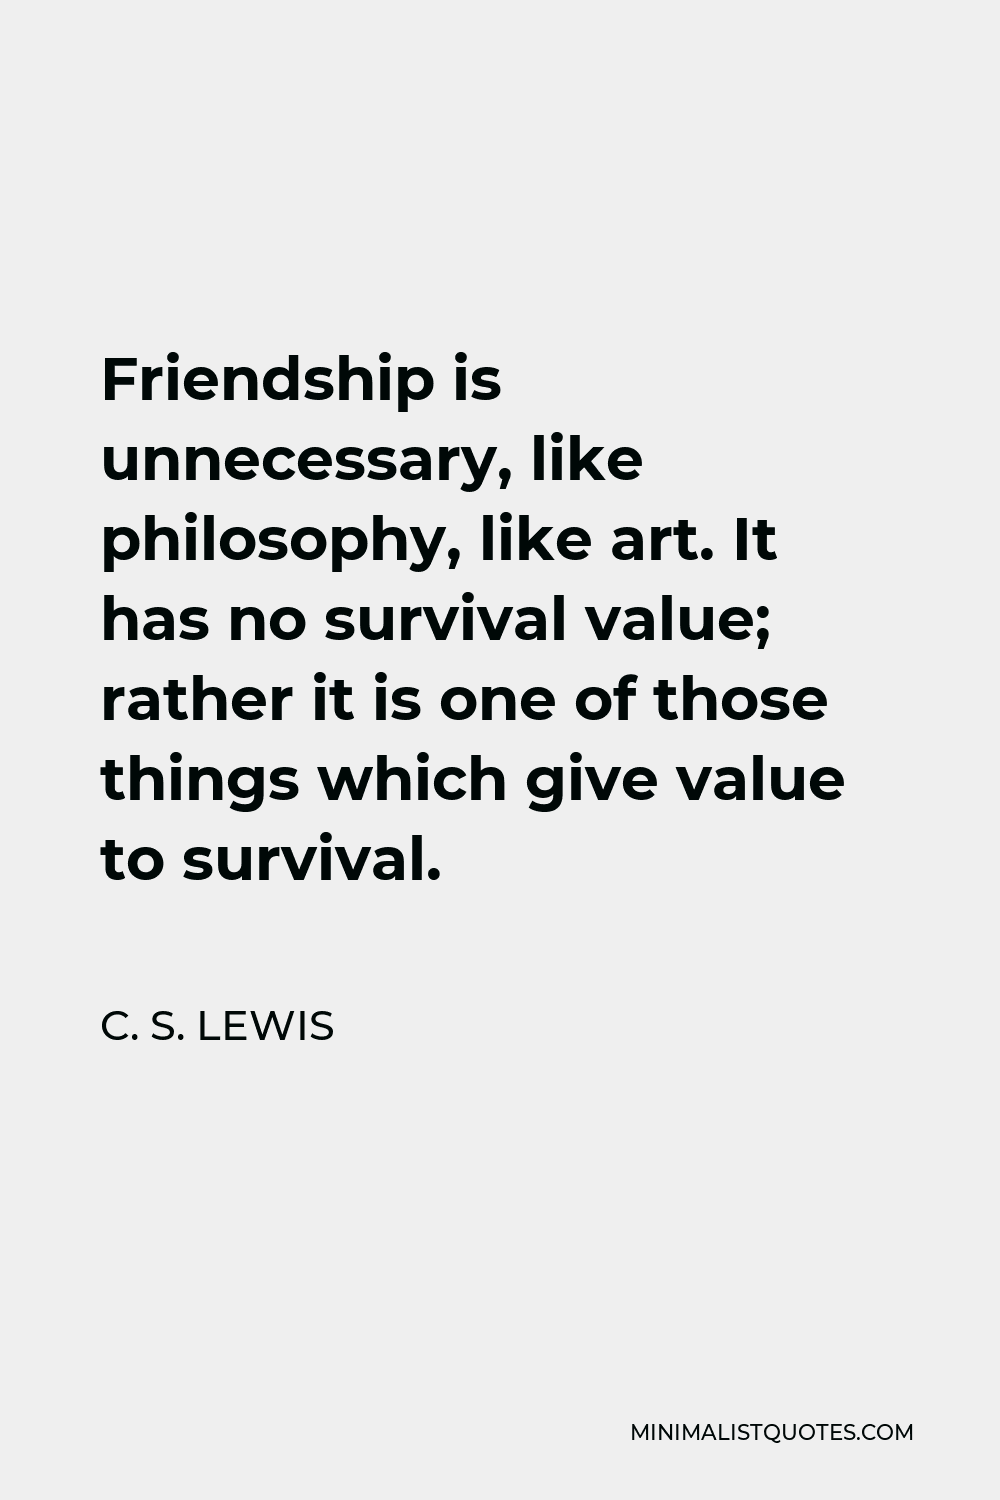 C. S. Lewis Quote - Friendship is unnecessary, like philosophy, like art. It has no survival value; rather it is one of those things which give value to survival.